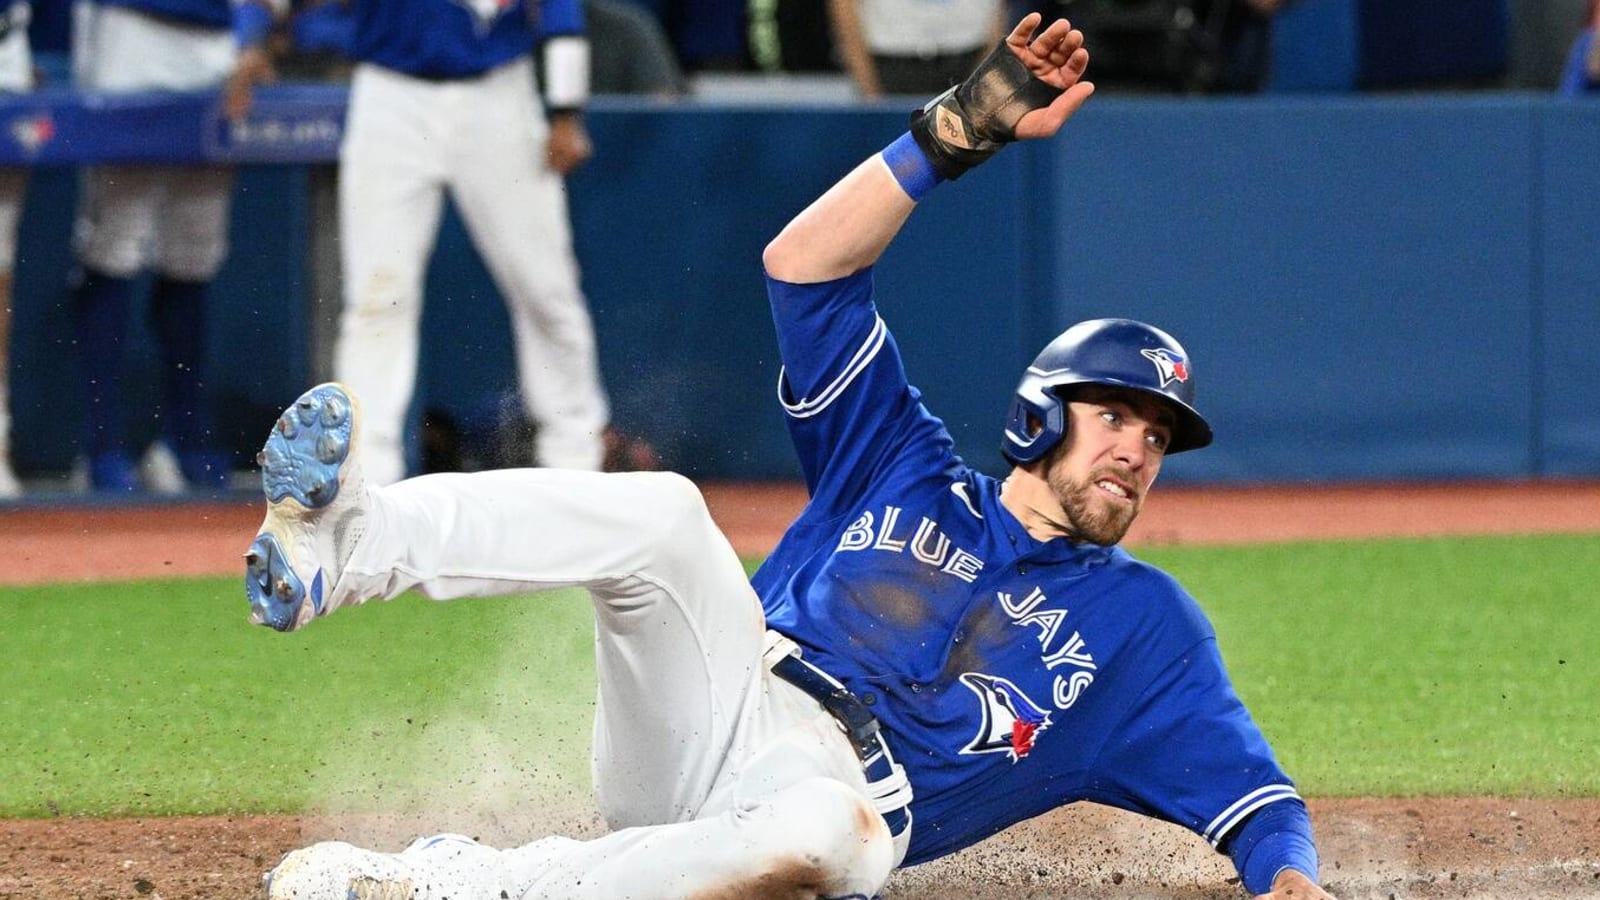 Casey Lawrence and Bradley Zimmer join the Blue Jays as September rosters expand to 28 players